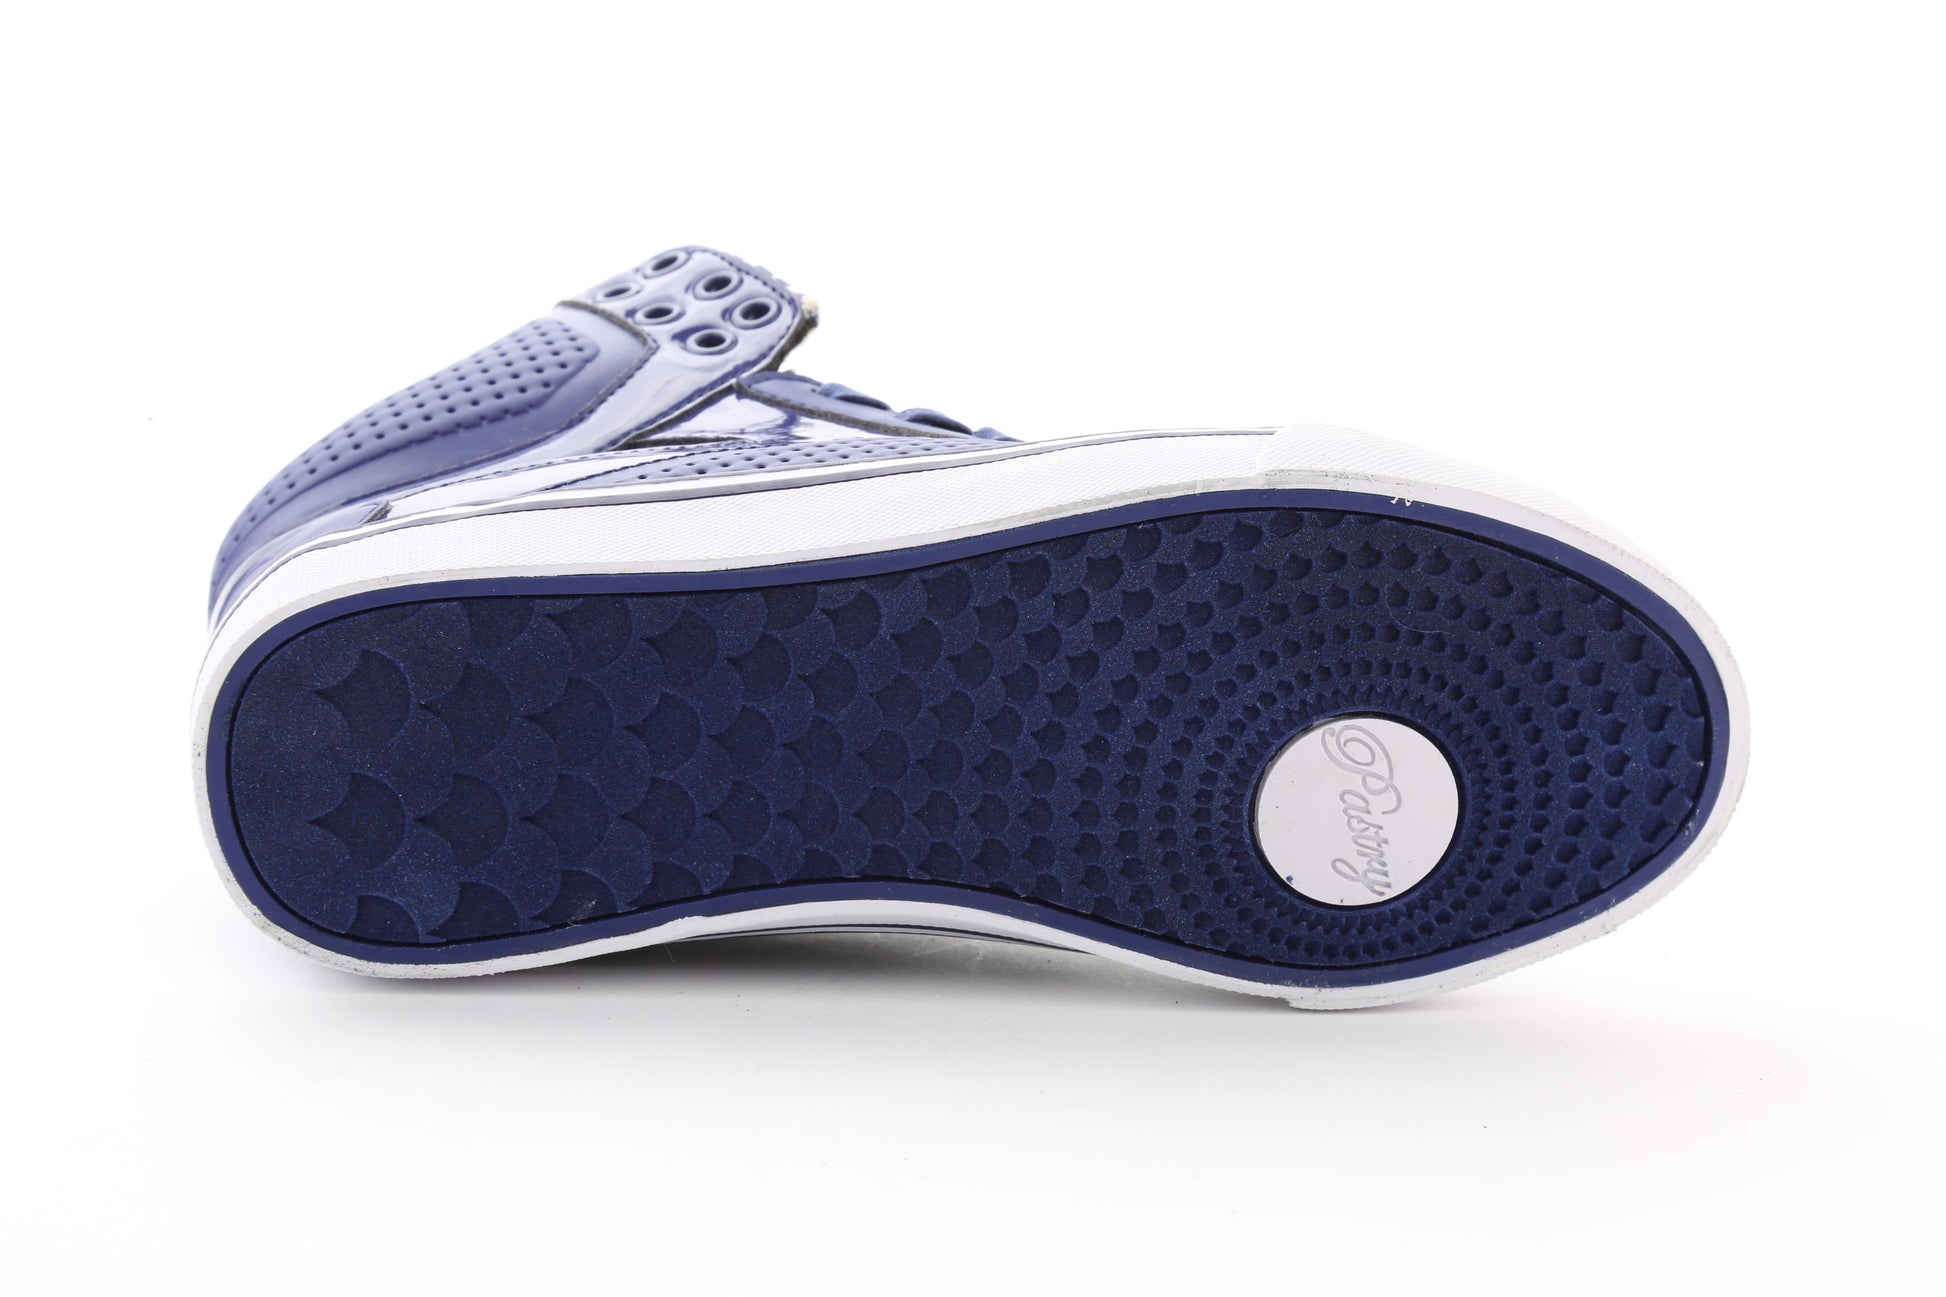 Pastry Pop Tart Grid Youth Sneaker in Navy outsole view